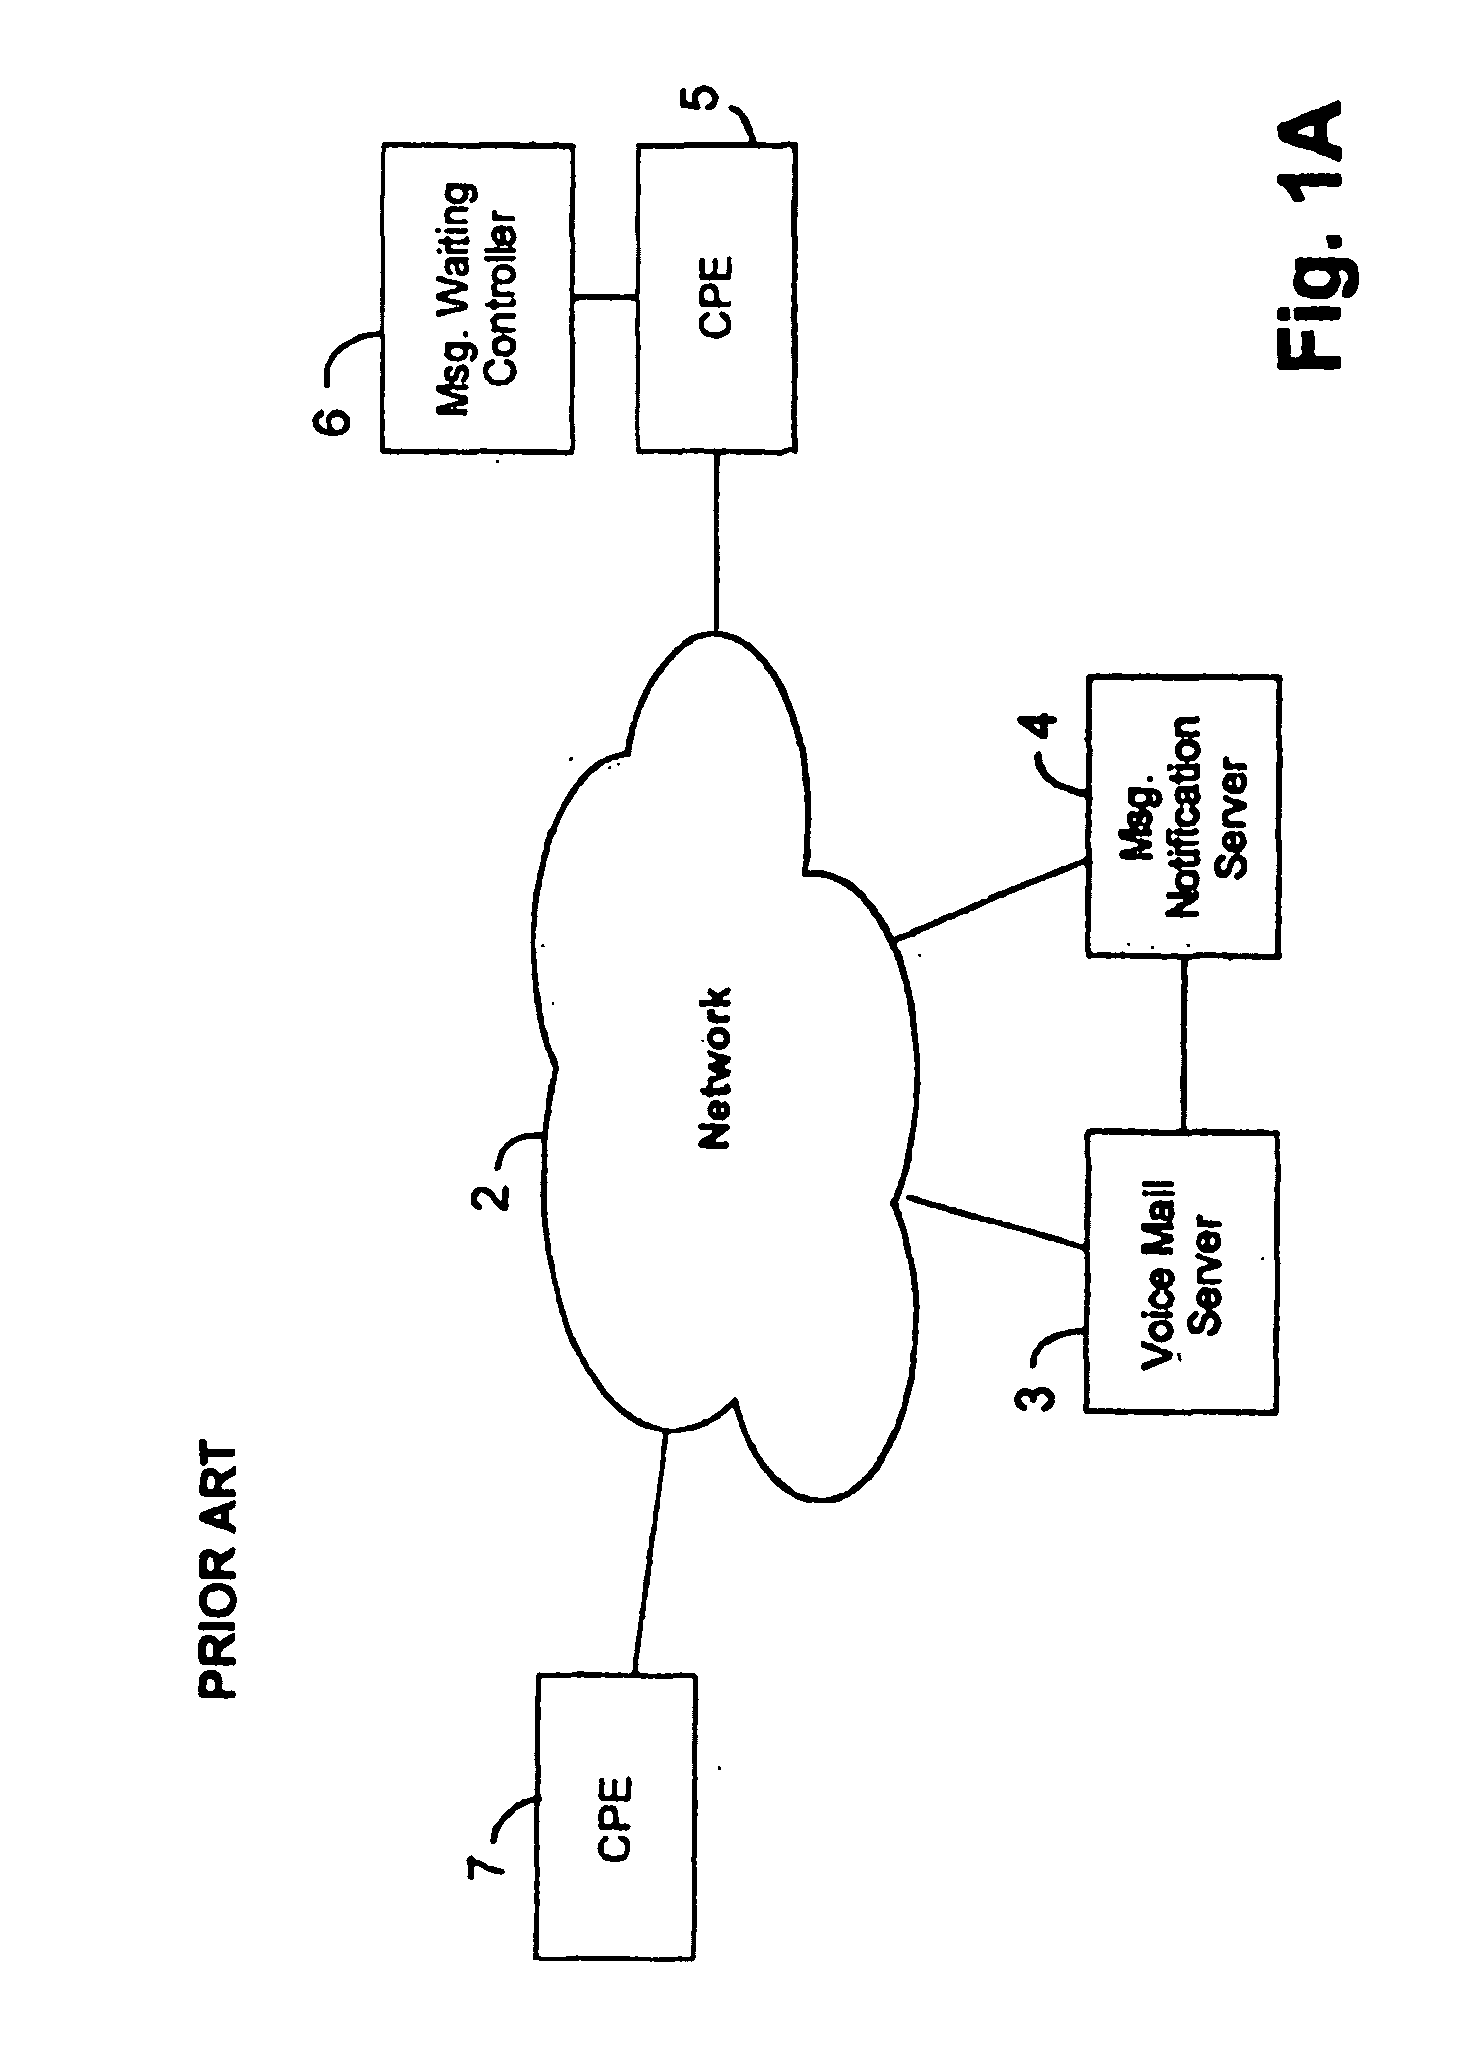 Intelligent voicemail message waiting system and method